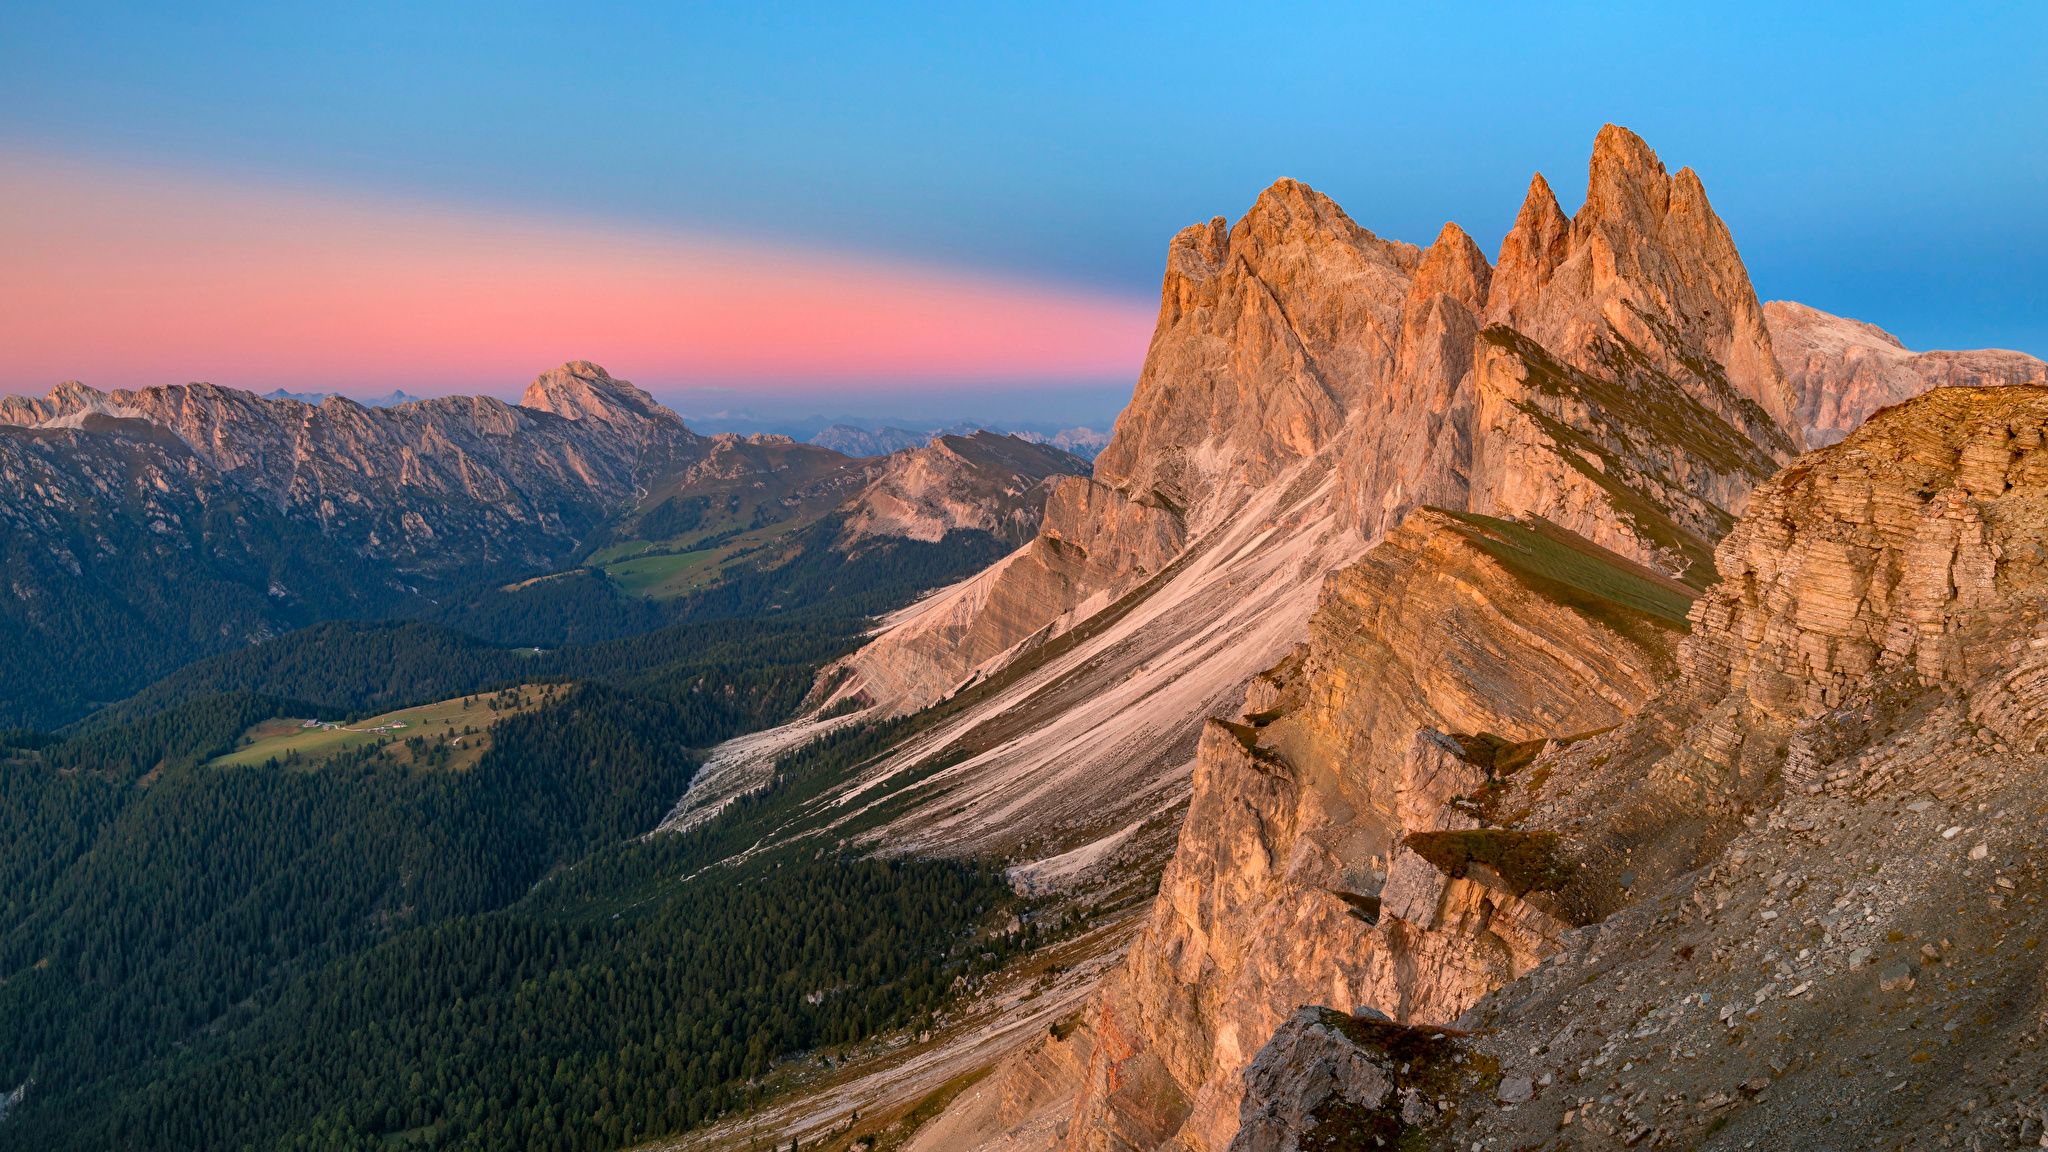 What is the Highest Mountain Peak in South Tyrol?